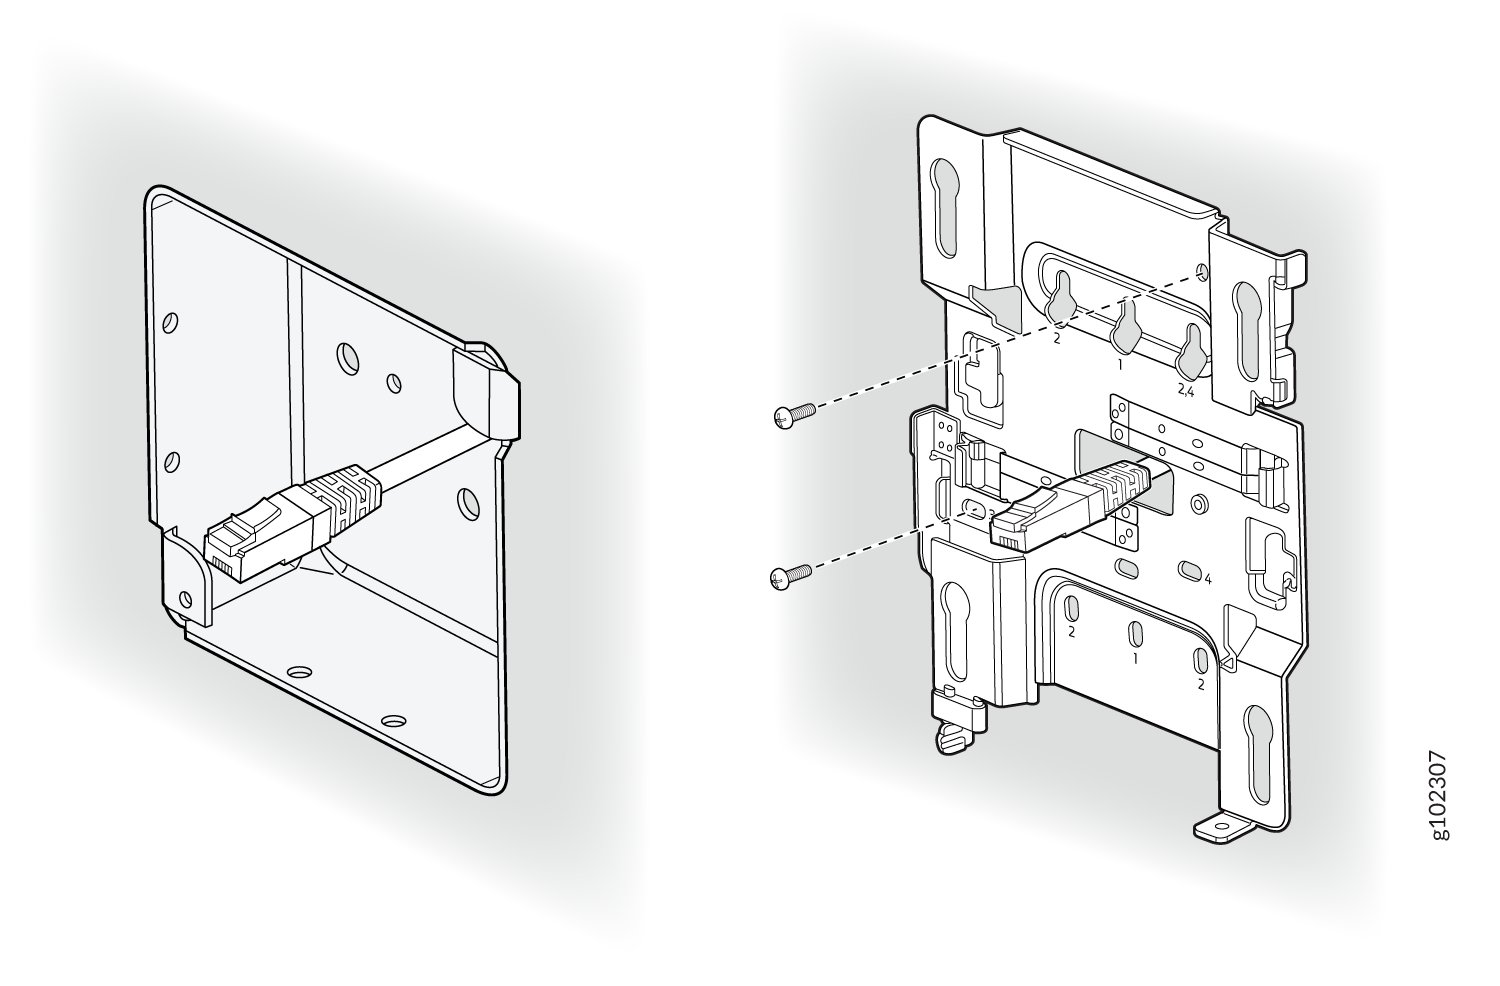 Attach the Mounting Bracket (APBR-U) to a US 4-Inch Square Junction Box